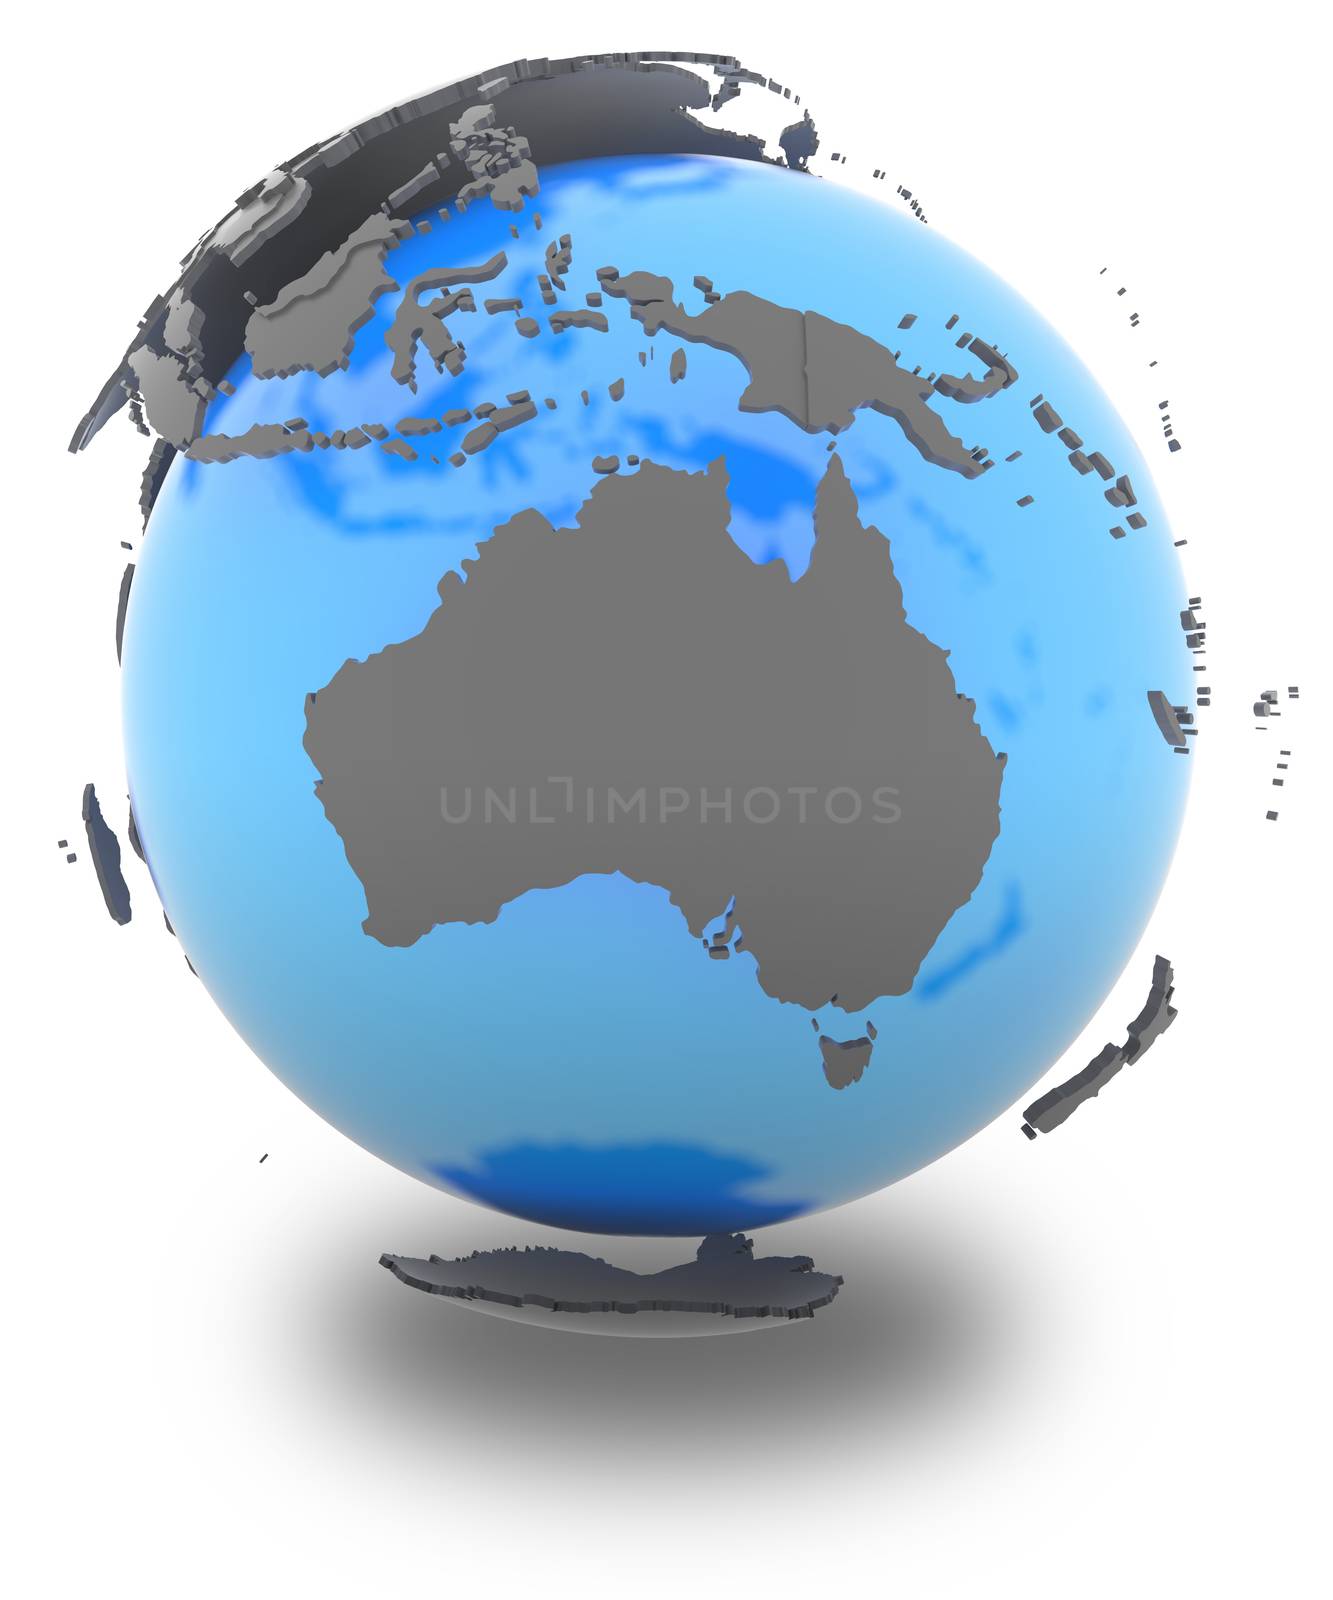 Australia standing out of blue Earth in grey, isolated on white background